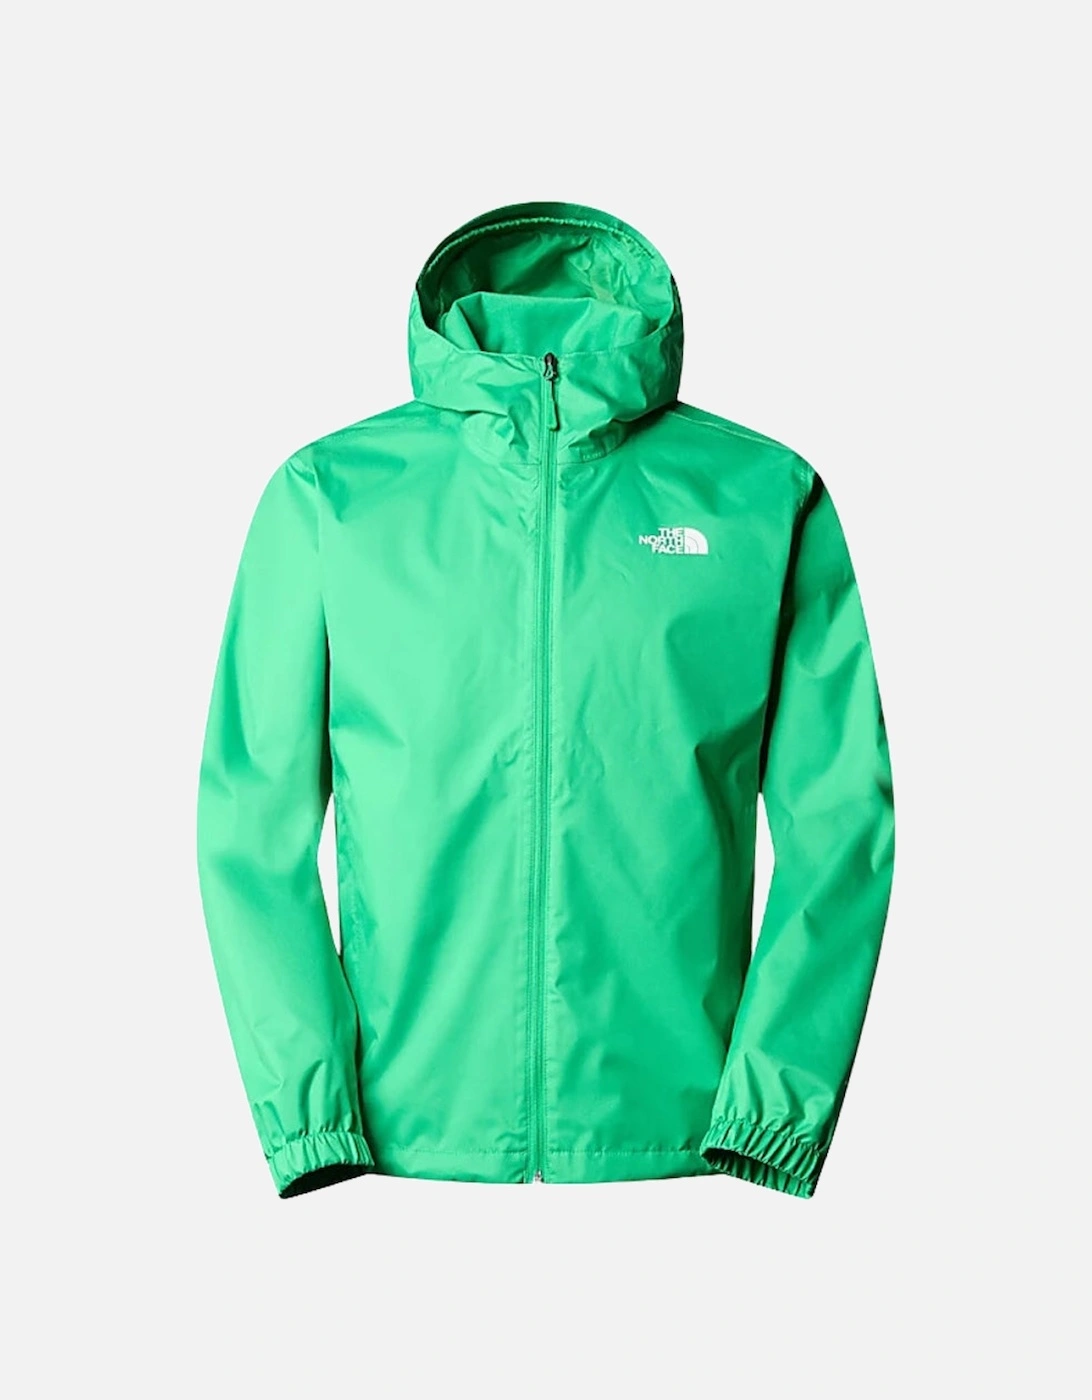 North Face Quest Jacket - Emerald, 3 of 2